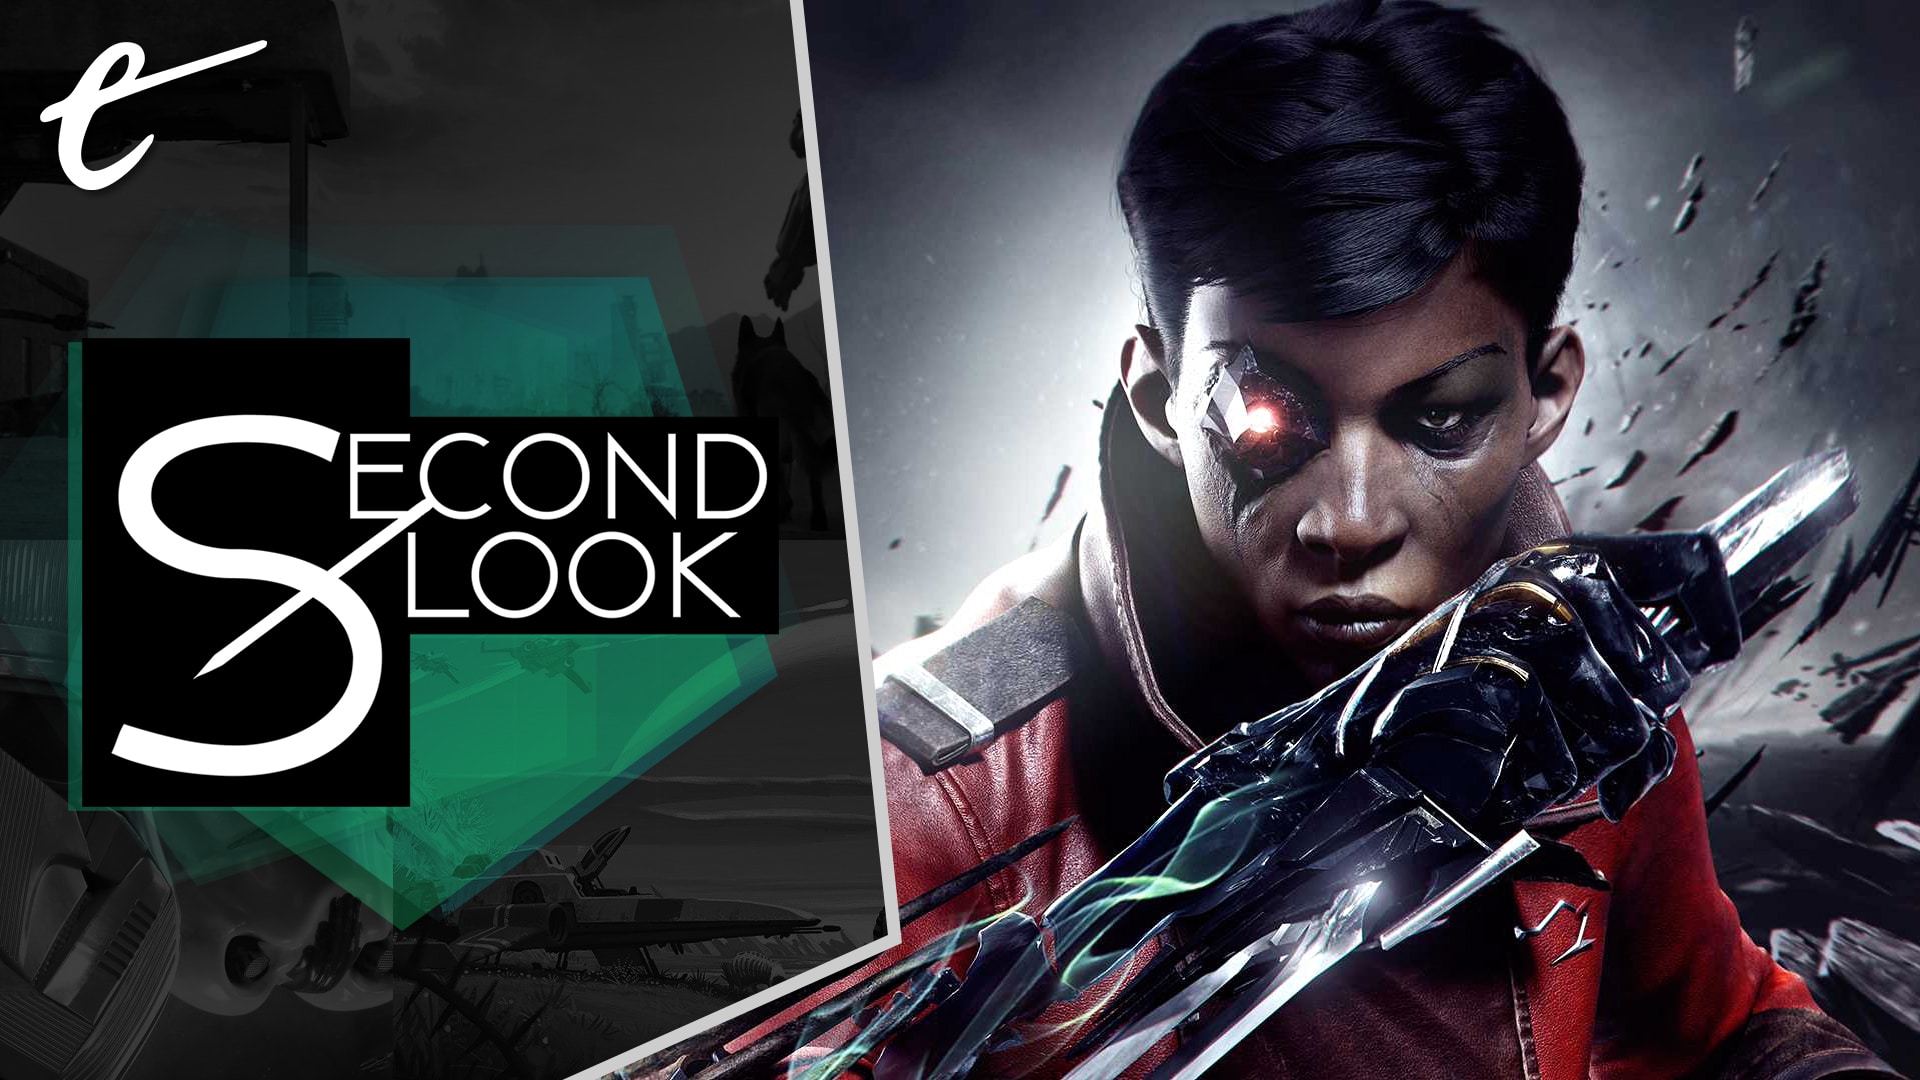 Game review: Dishonored 2 is a thoughtful sequel